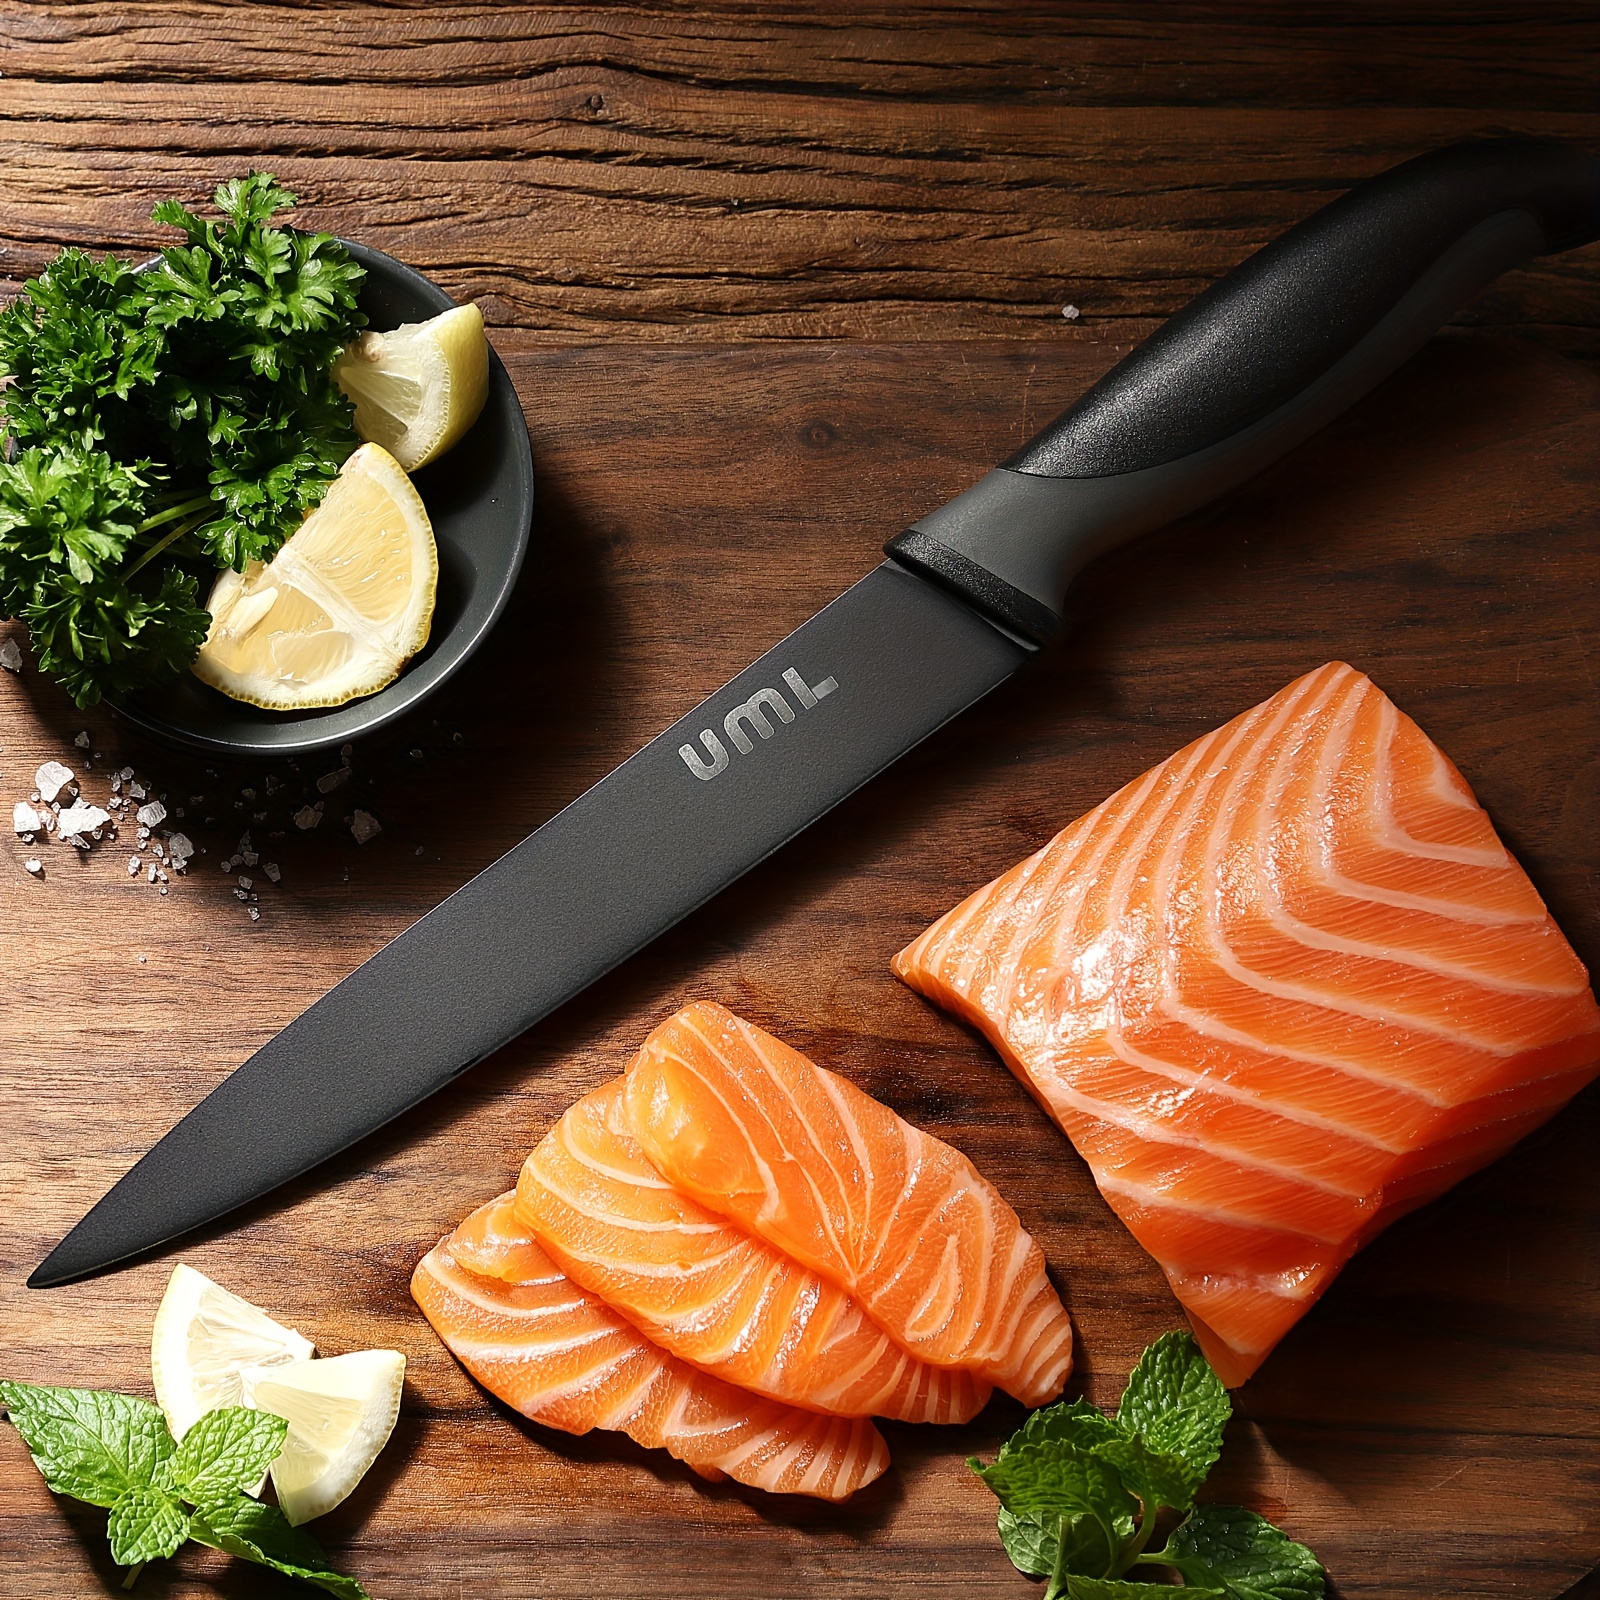 

Chef Knife 8 Inch Professional Kitchen Knives Meat Cleaver Carving Knife, 5cr15mov German High Carbon Stainless Steel Chefs Knife Razor Sharp Black Oxide Coating With Ergonomic Handle